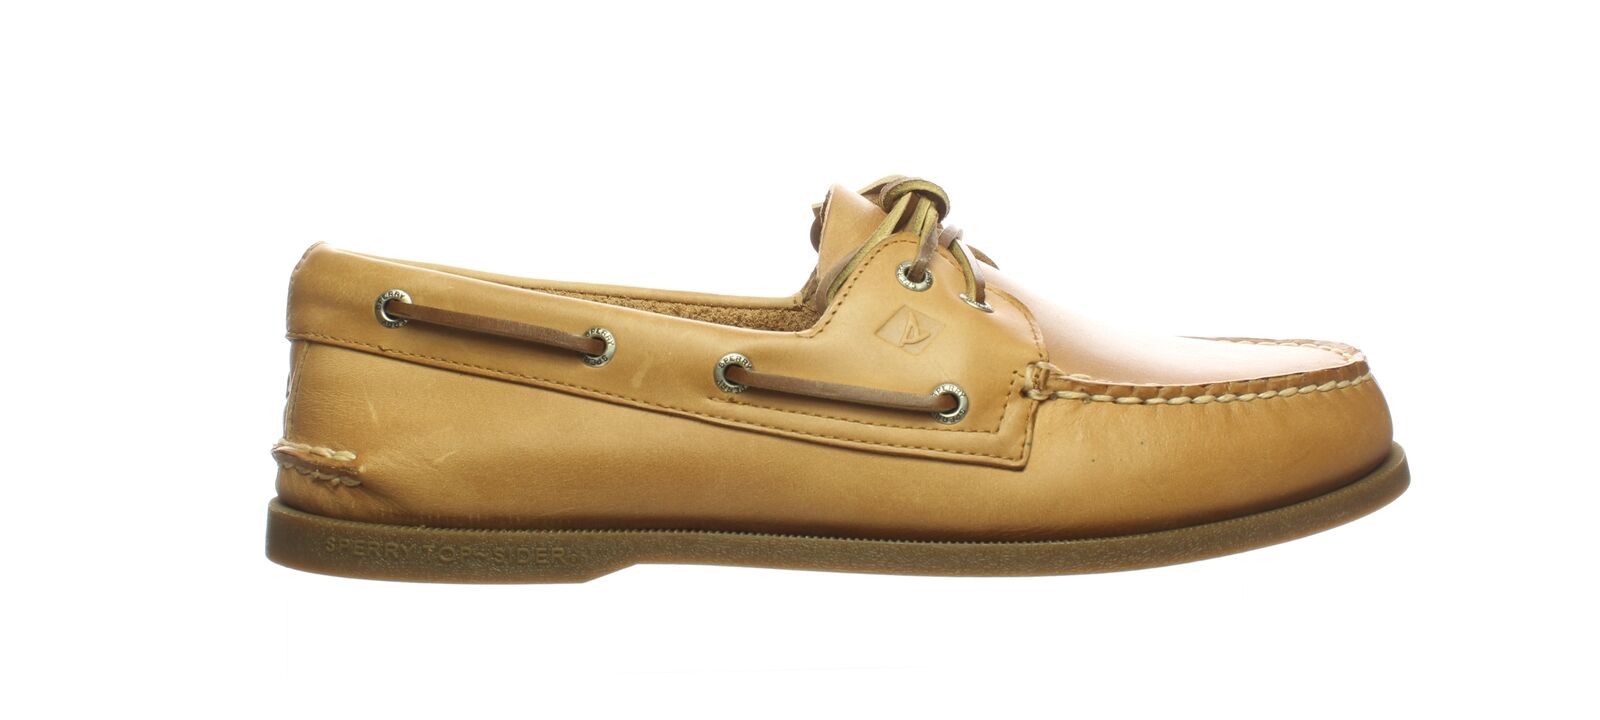 Sperry Top Sider Mens Super popular specialty Deluxe store Sahara Nutmeg Wide Size Shoes Boat 11.5